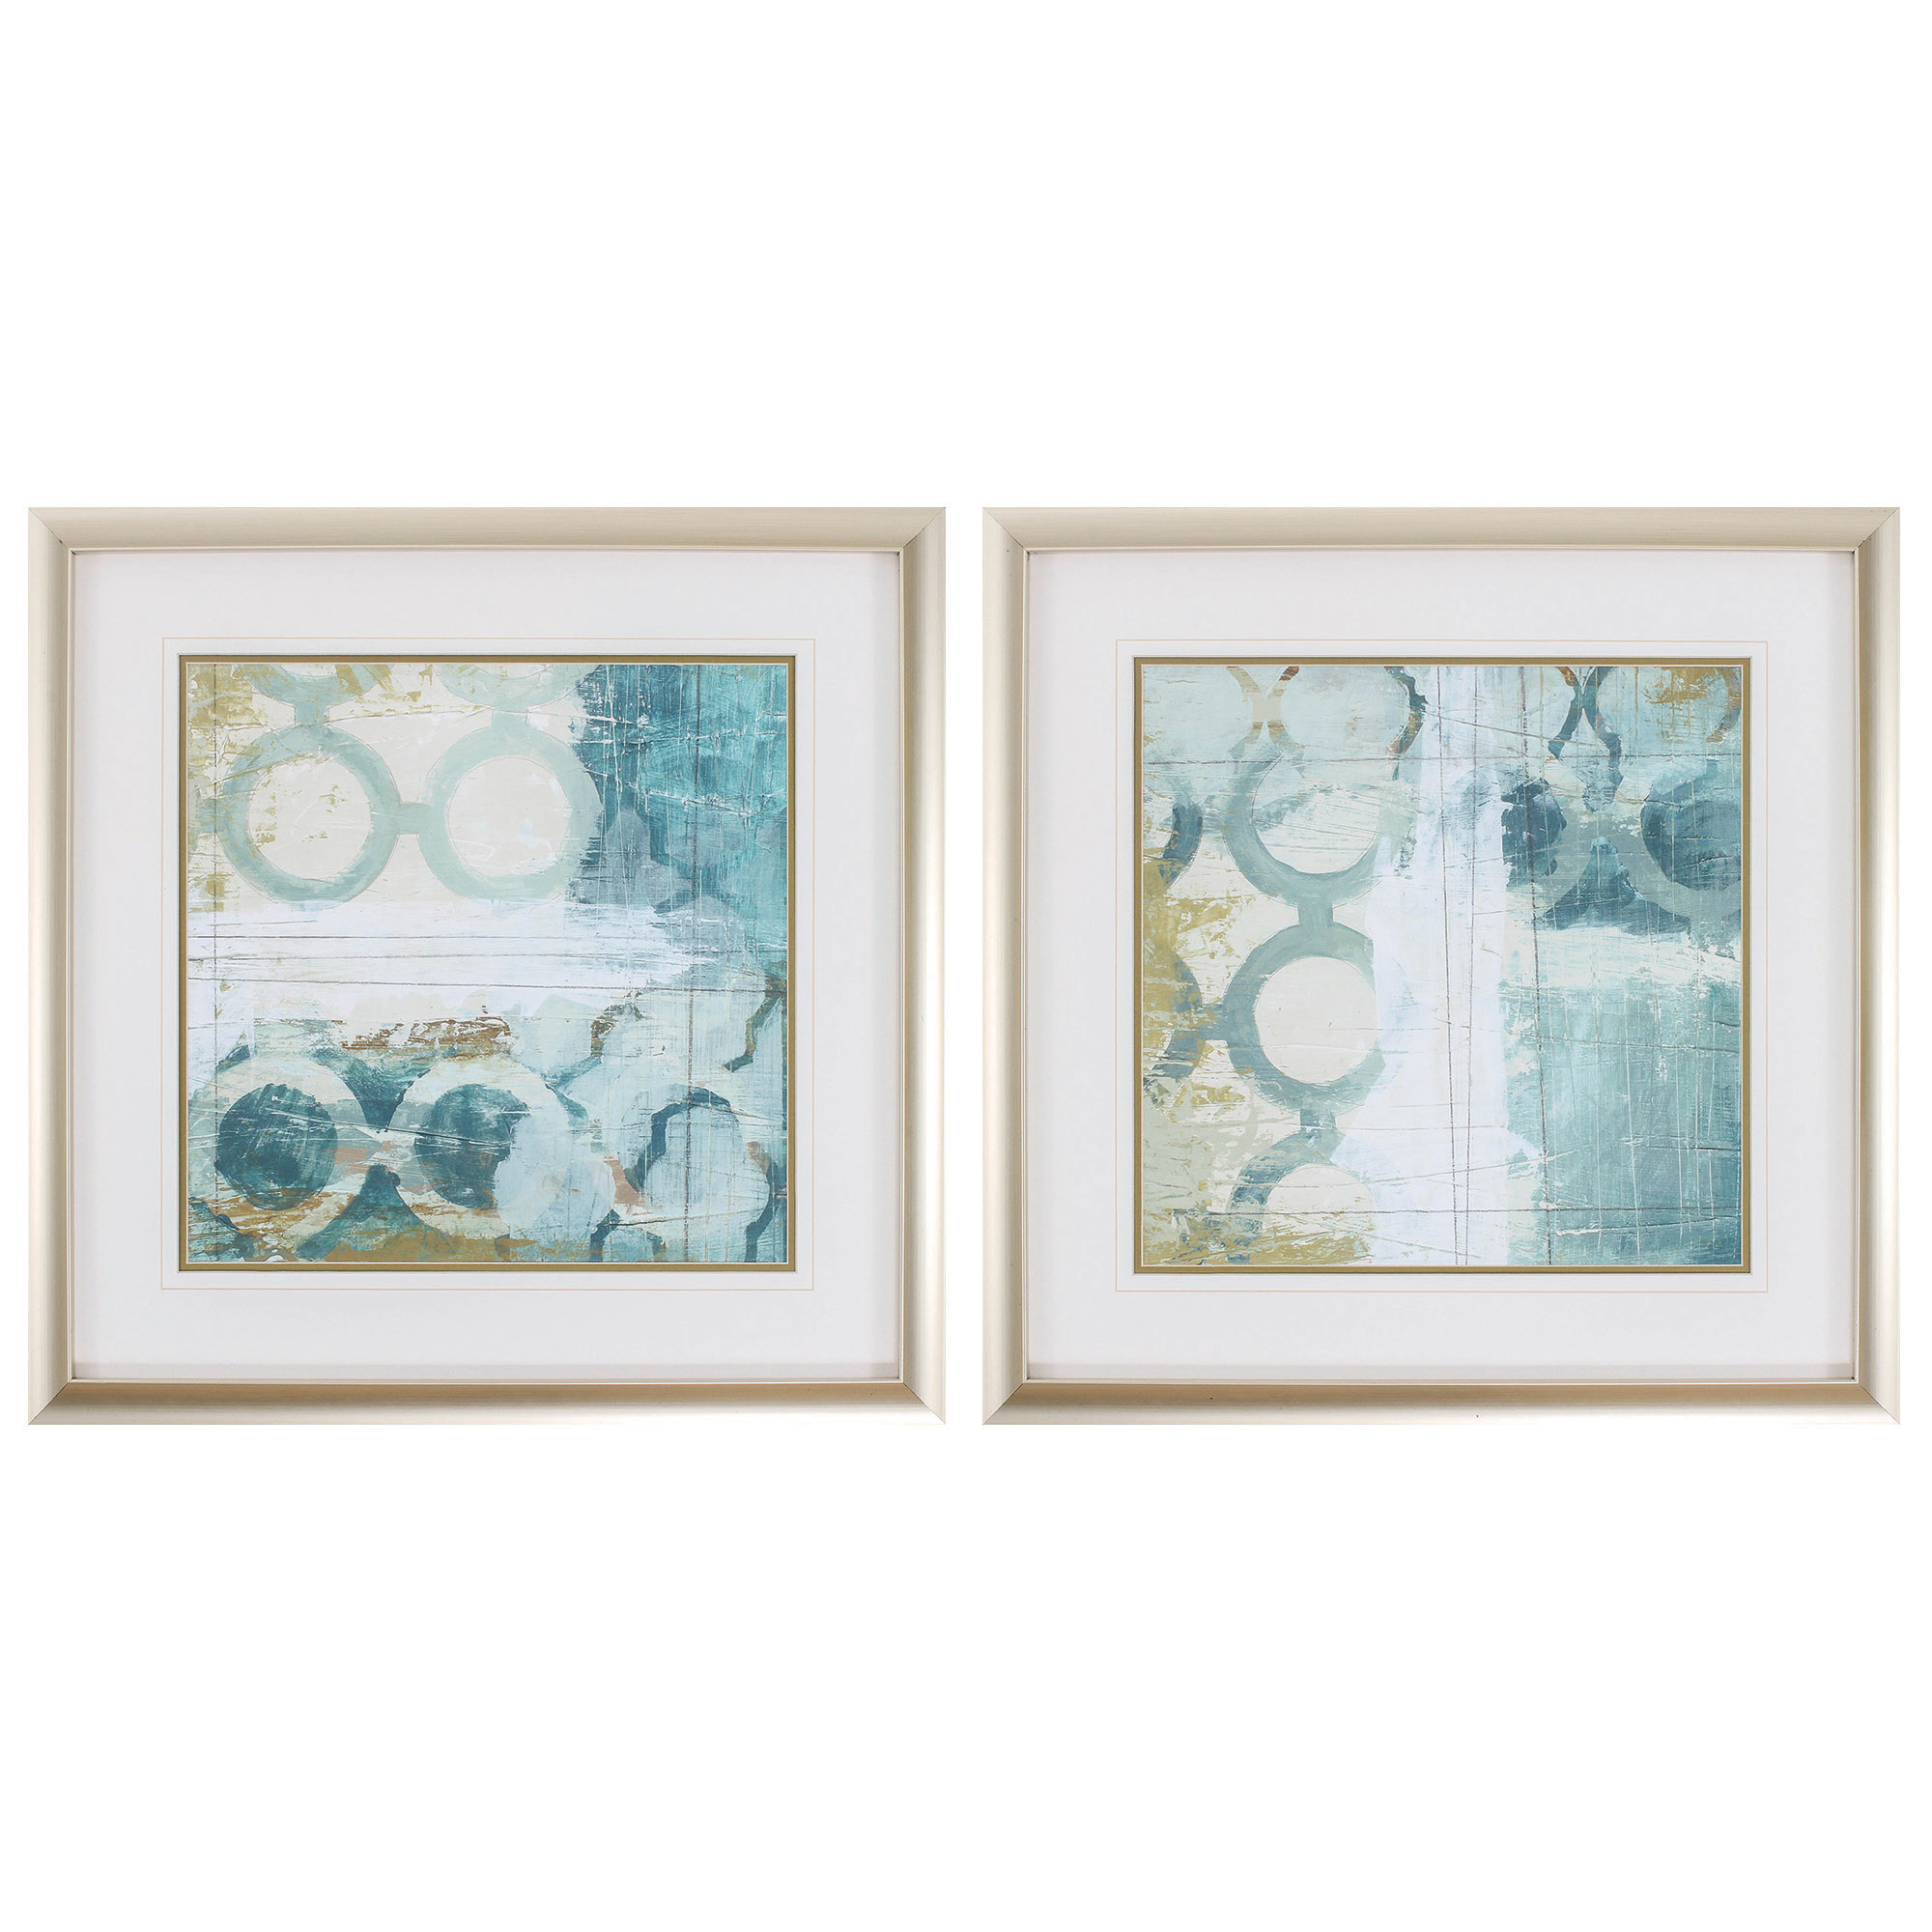 26" X 26" Champagne Gold Color Frame Blue Ramble (Set of 2)